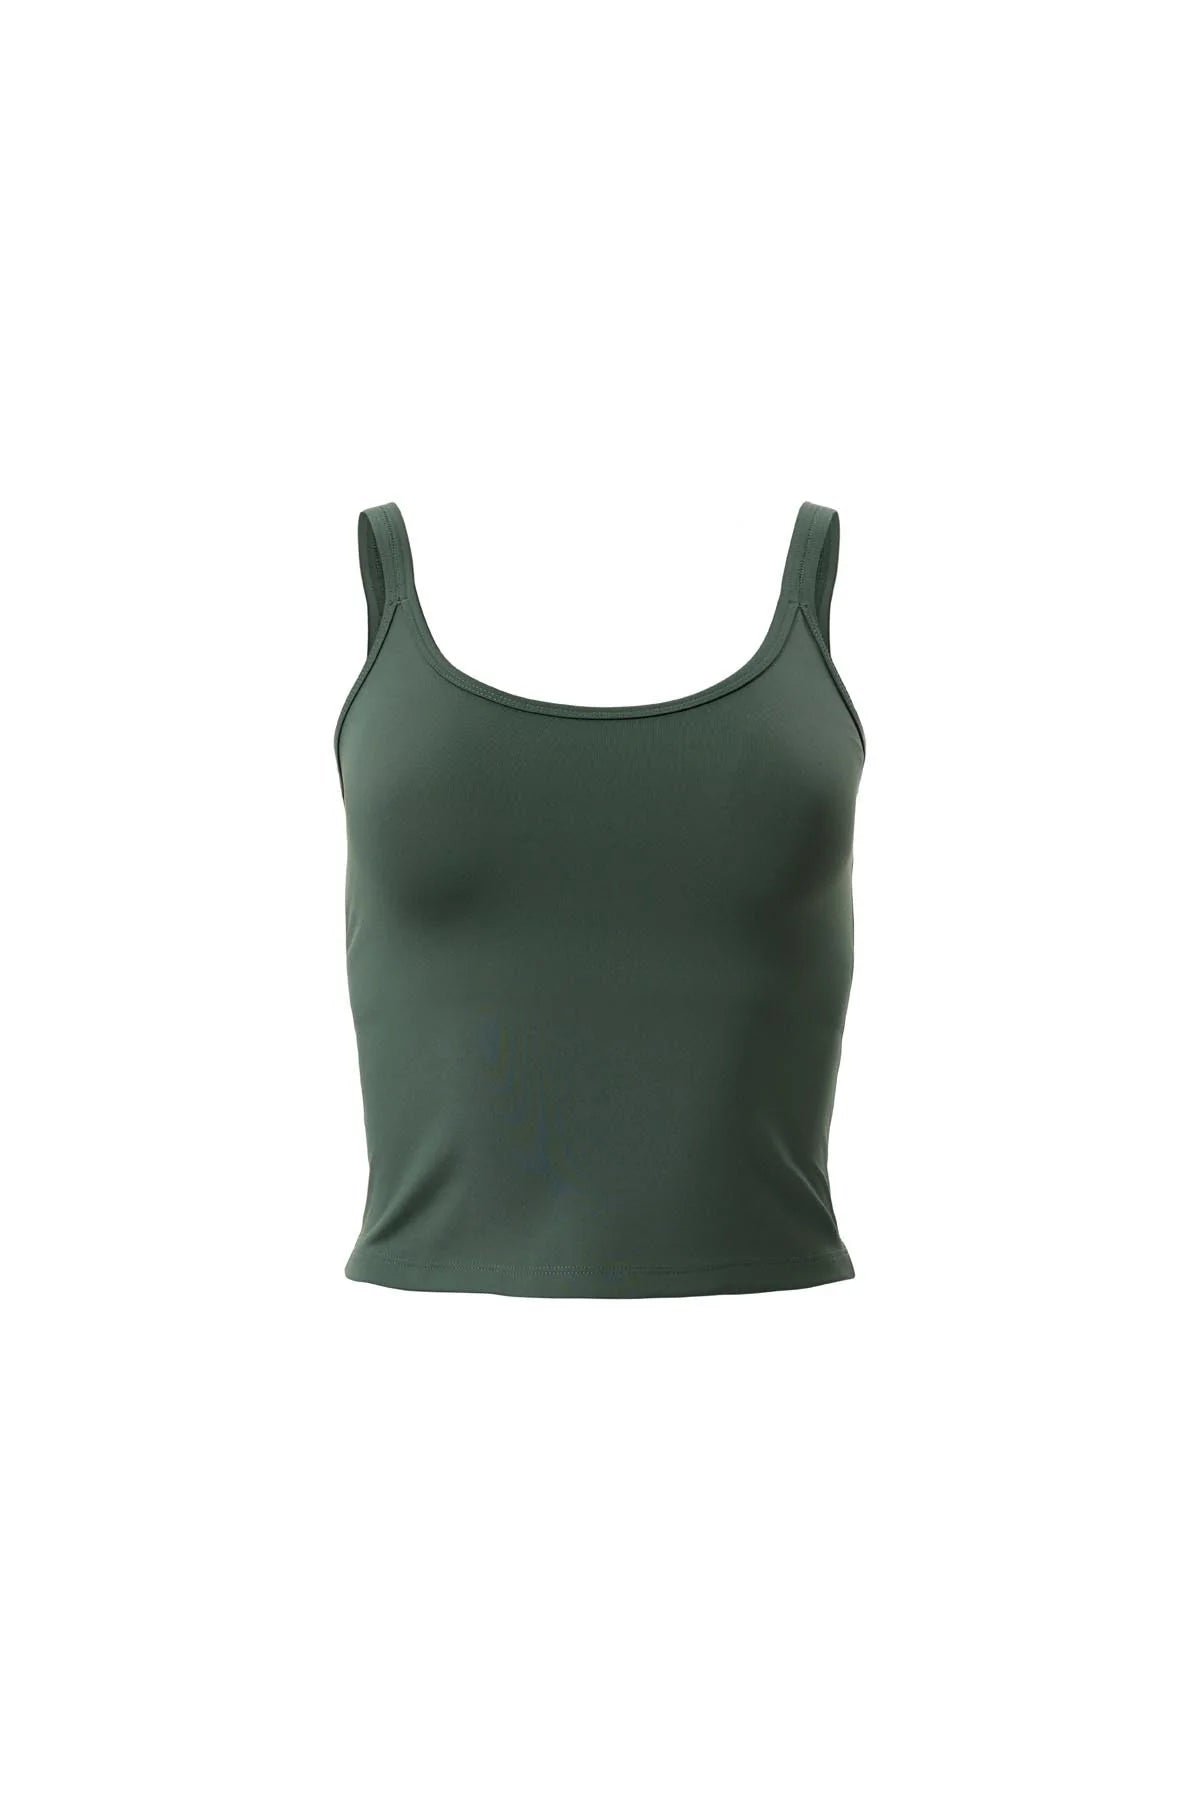 Girlfriend Collective Gemma Scoop Tank - Moss – Woo To See You™